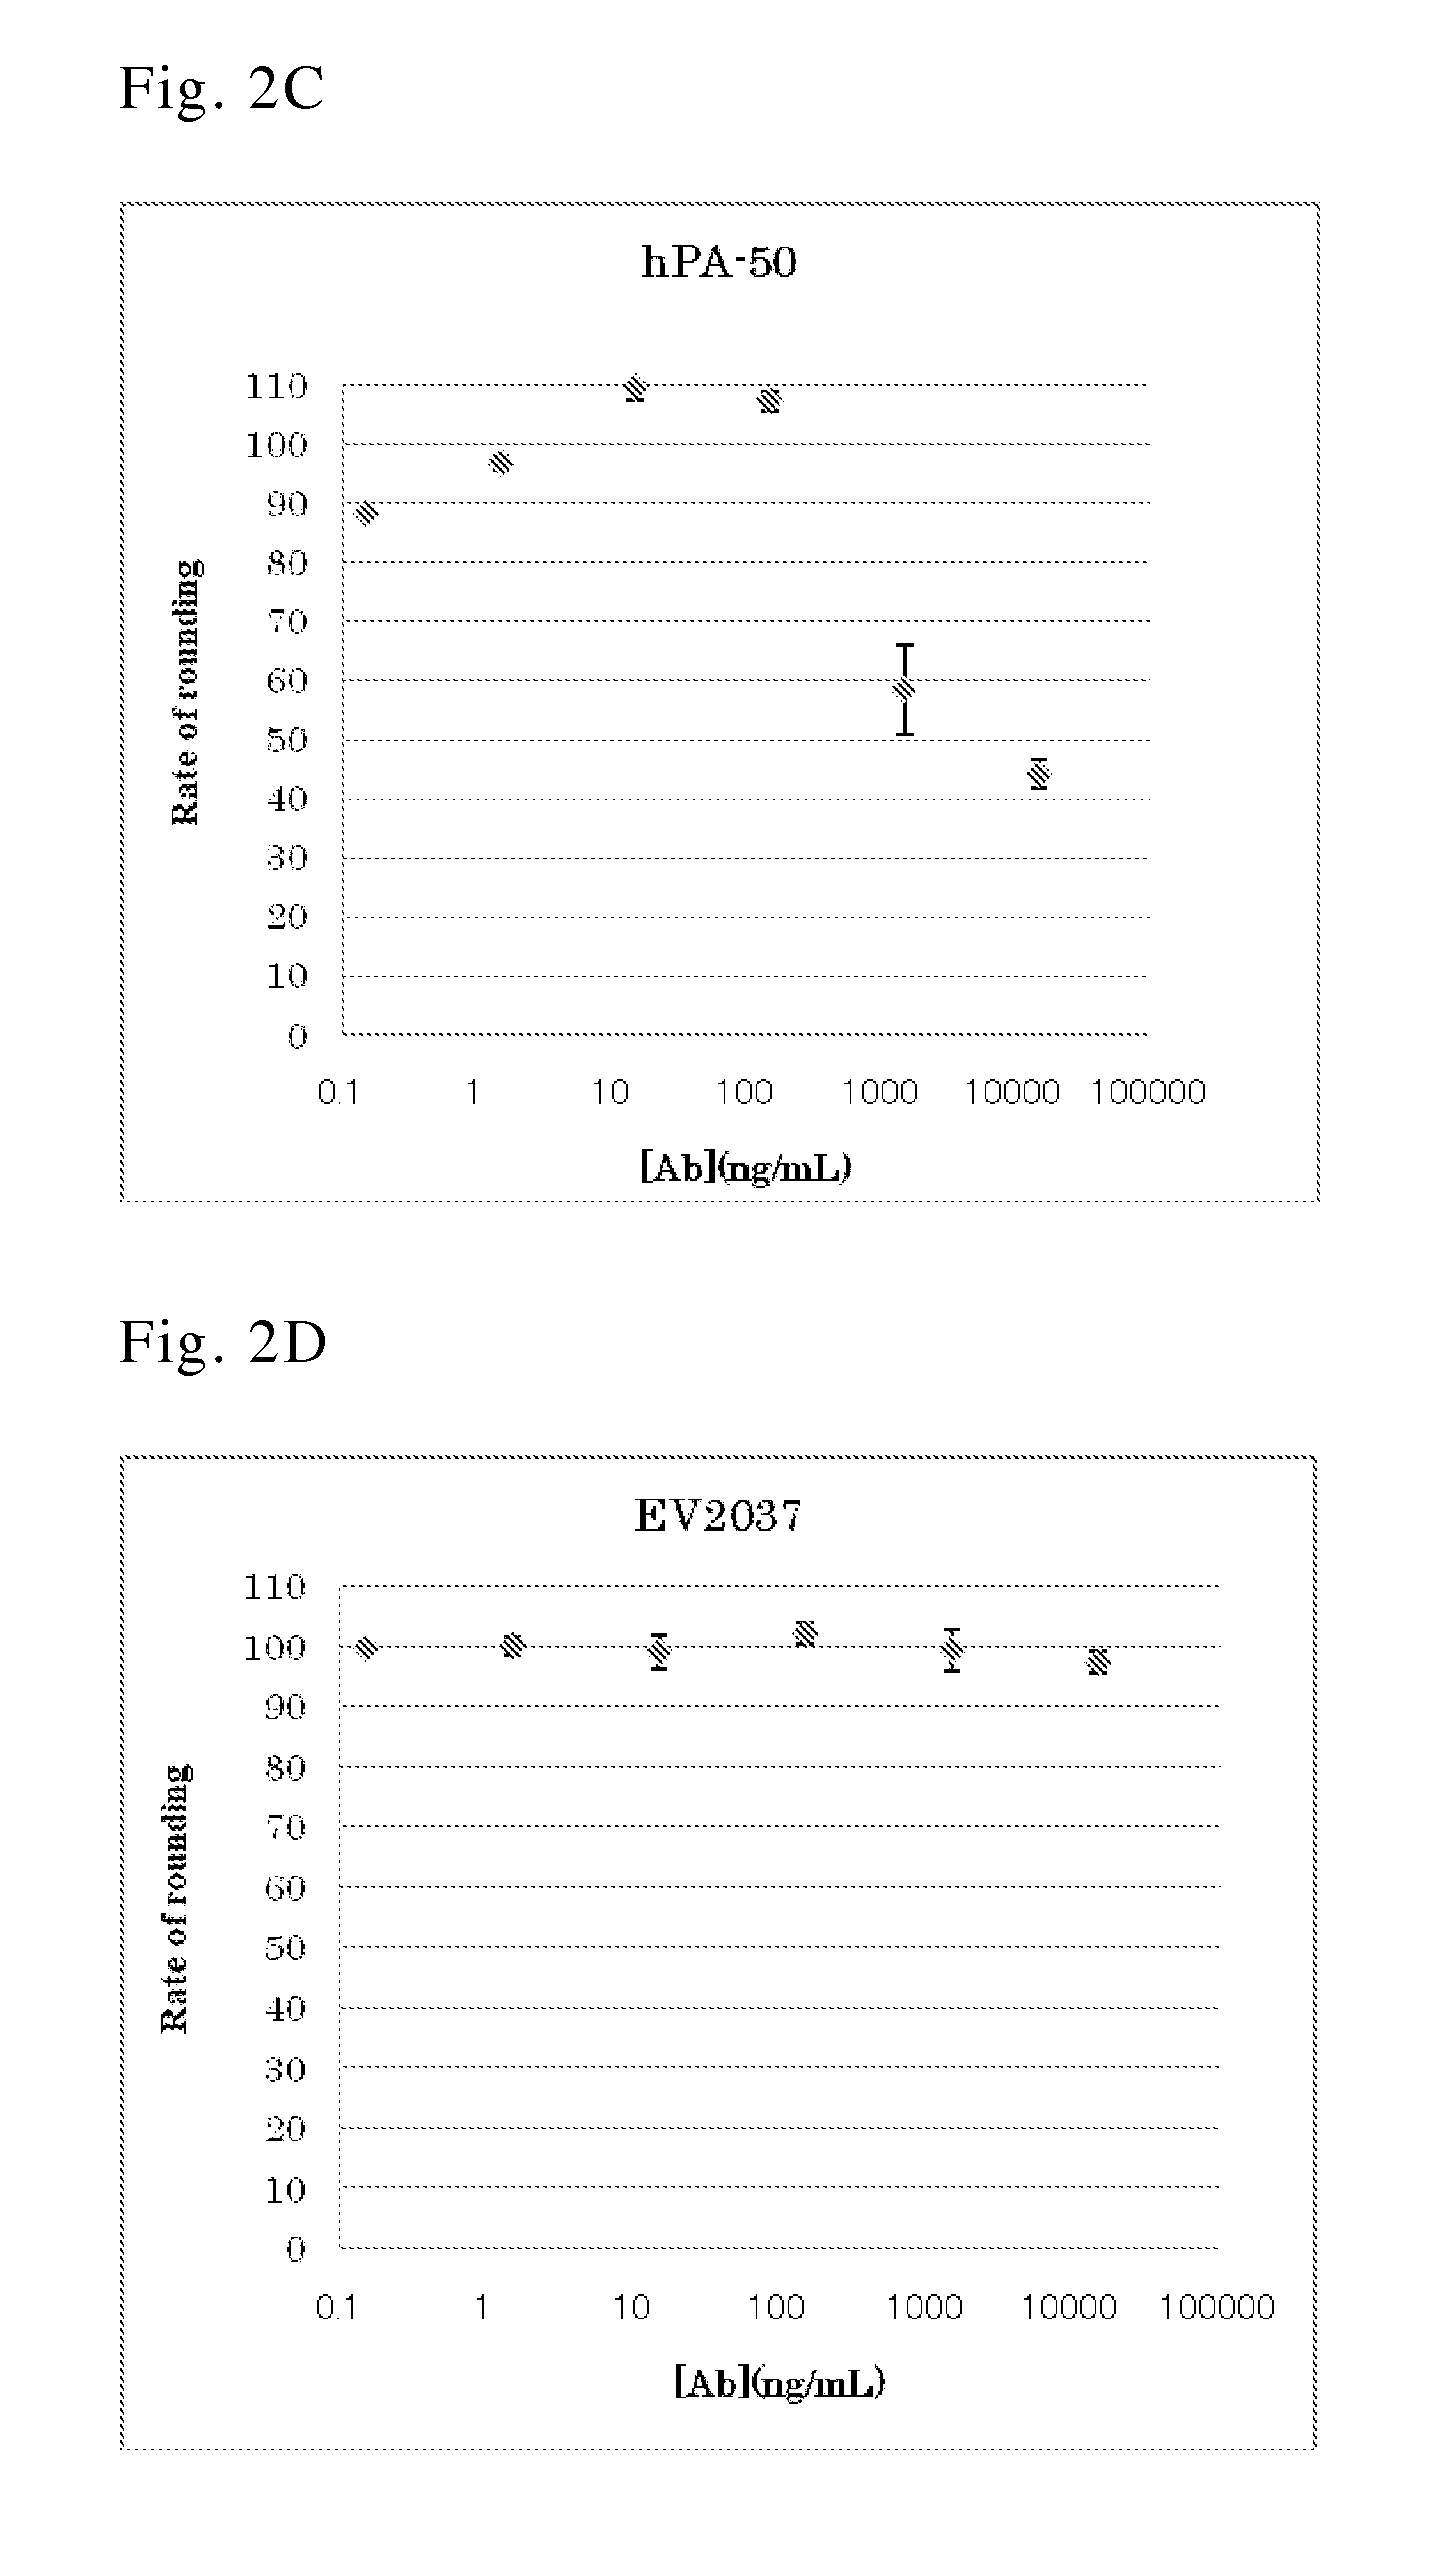 Human antibody specific to toxin produced from clostridium difficile, or antigen-binding fragment thereof